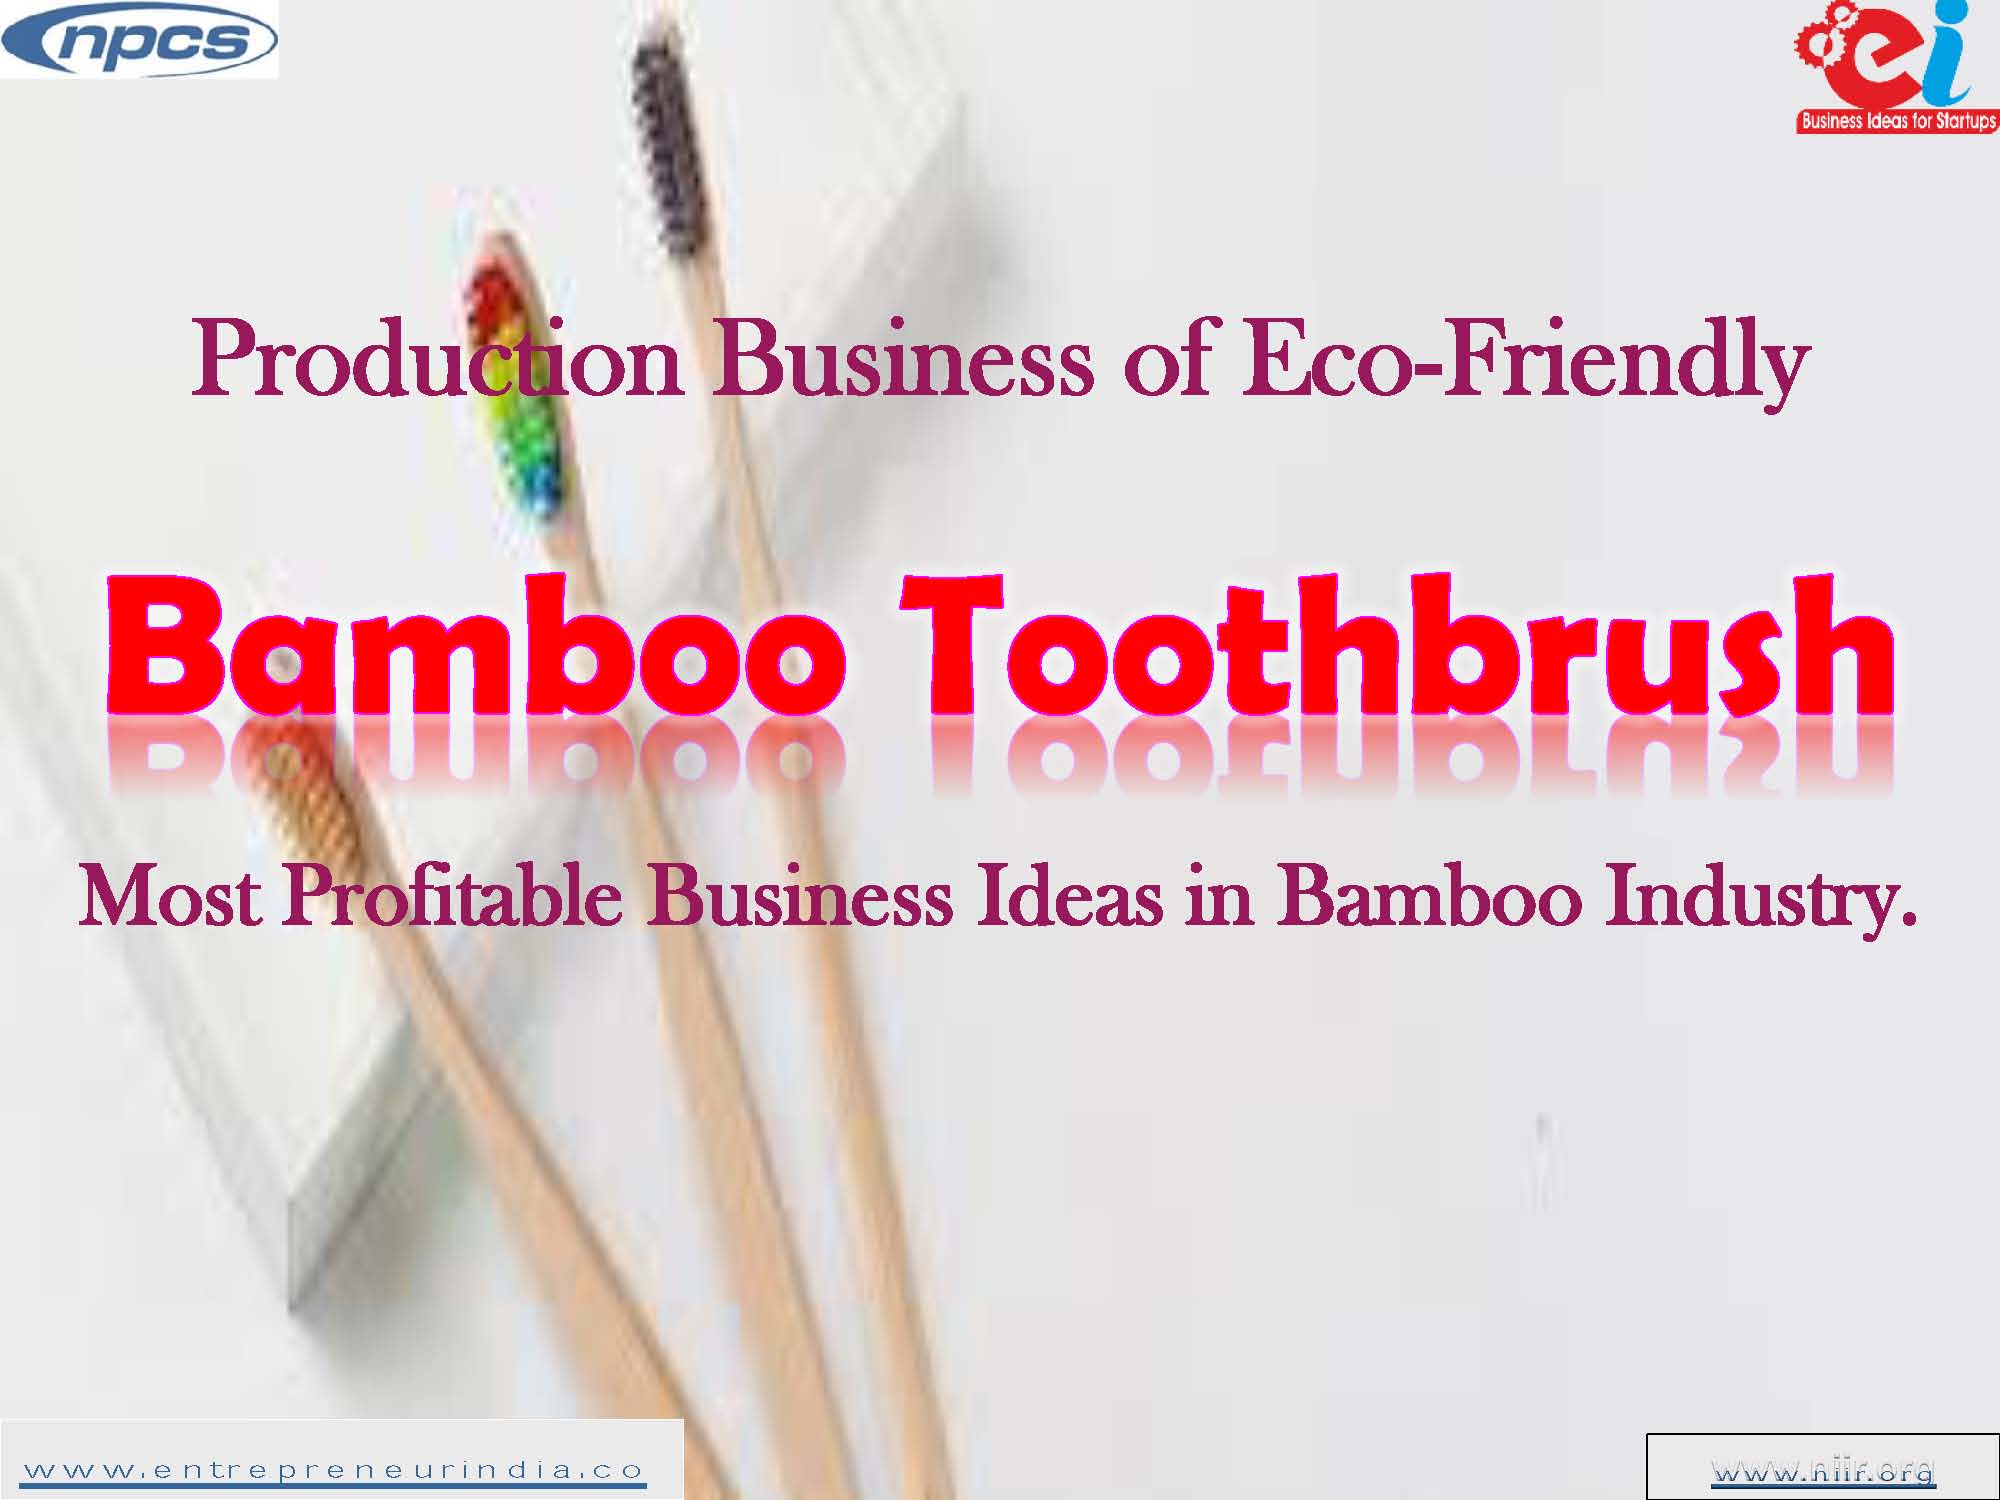 Production Business of Eco Friendly Bamboo Toothbrush Most Profitable Business Ideas in Bamboo Industry